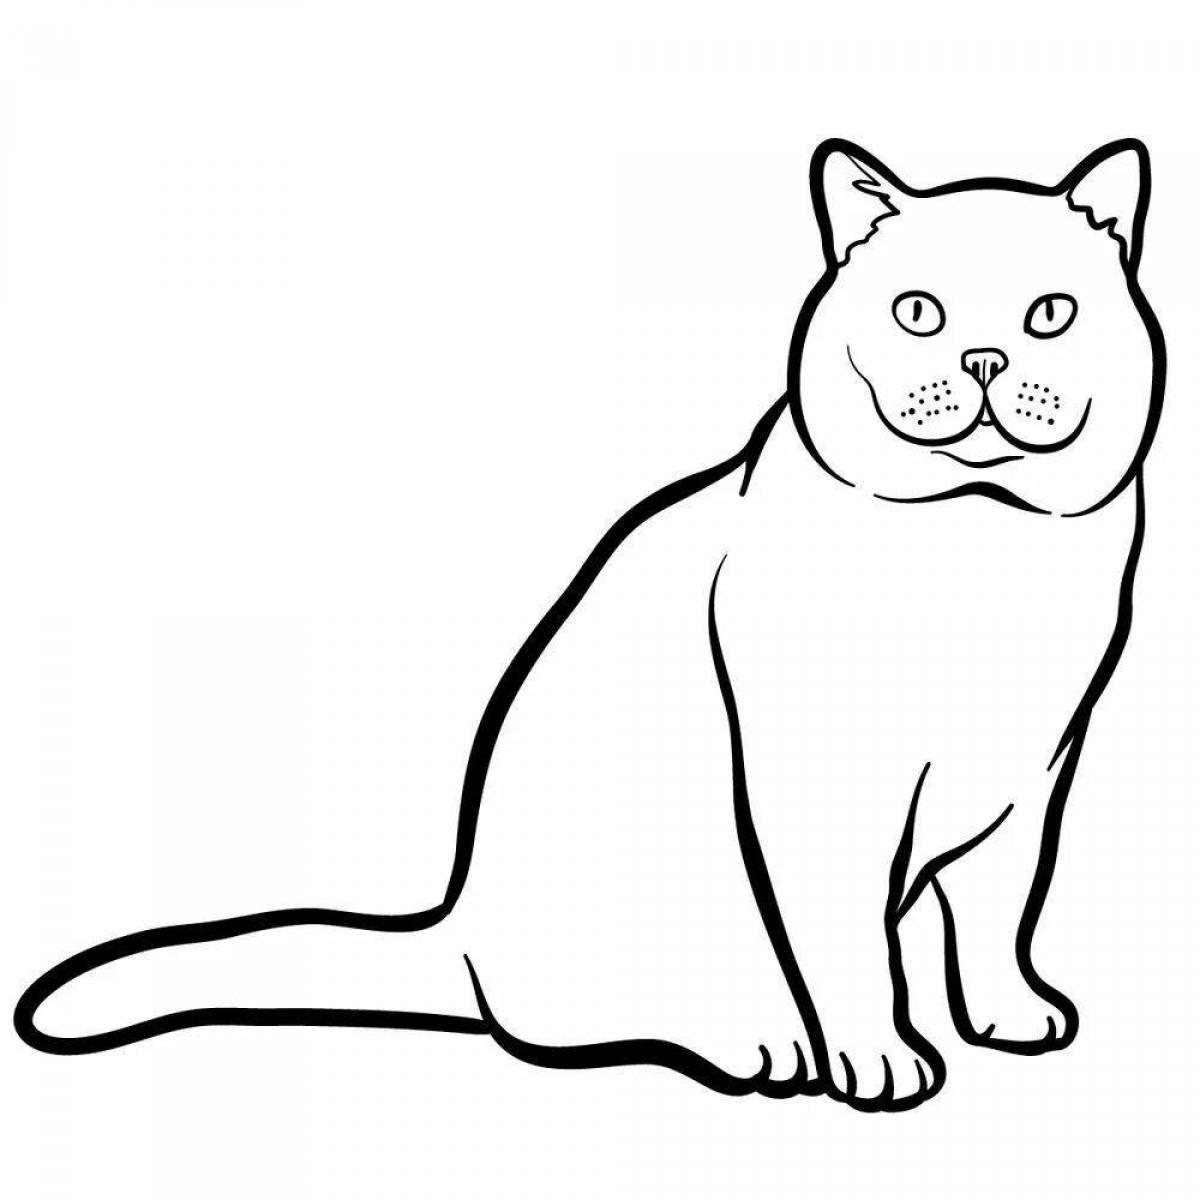 Coloring page mischievous fold cat